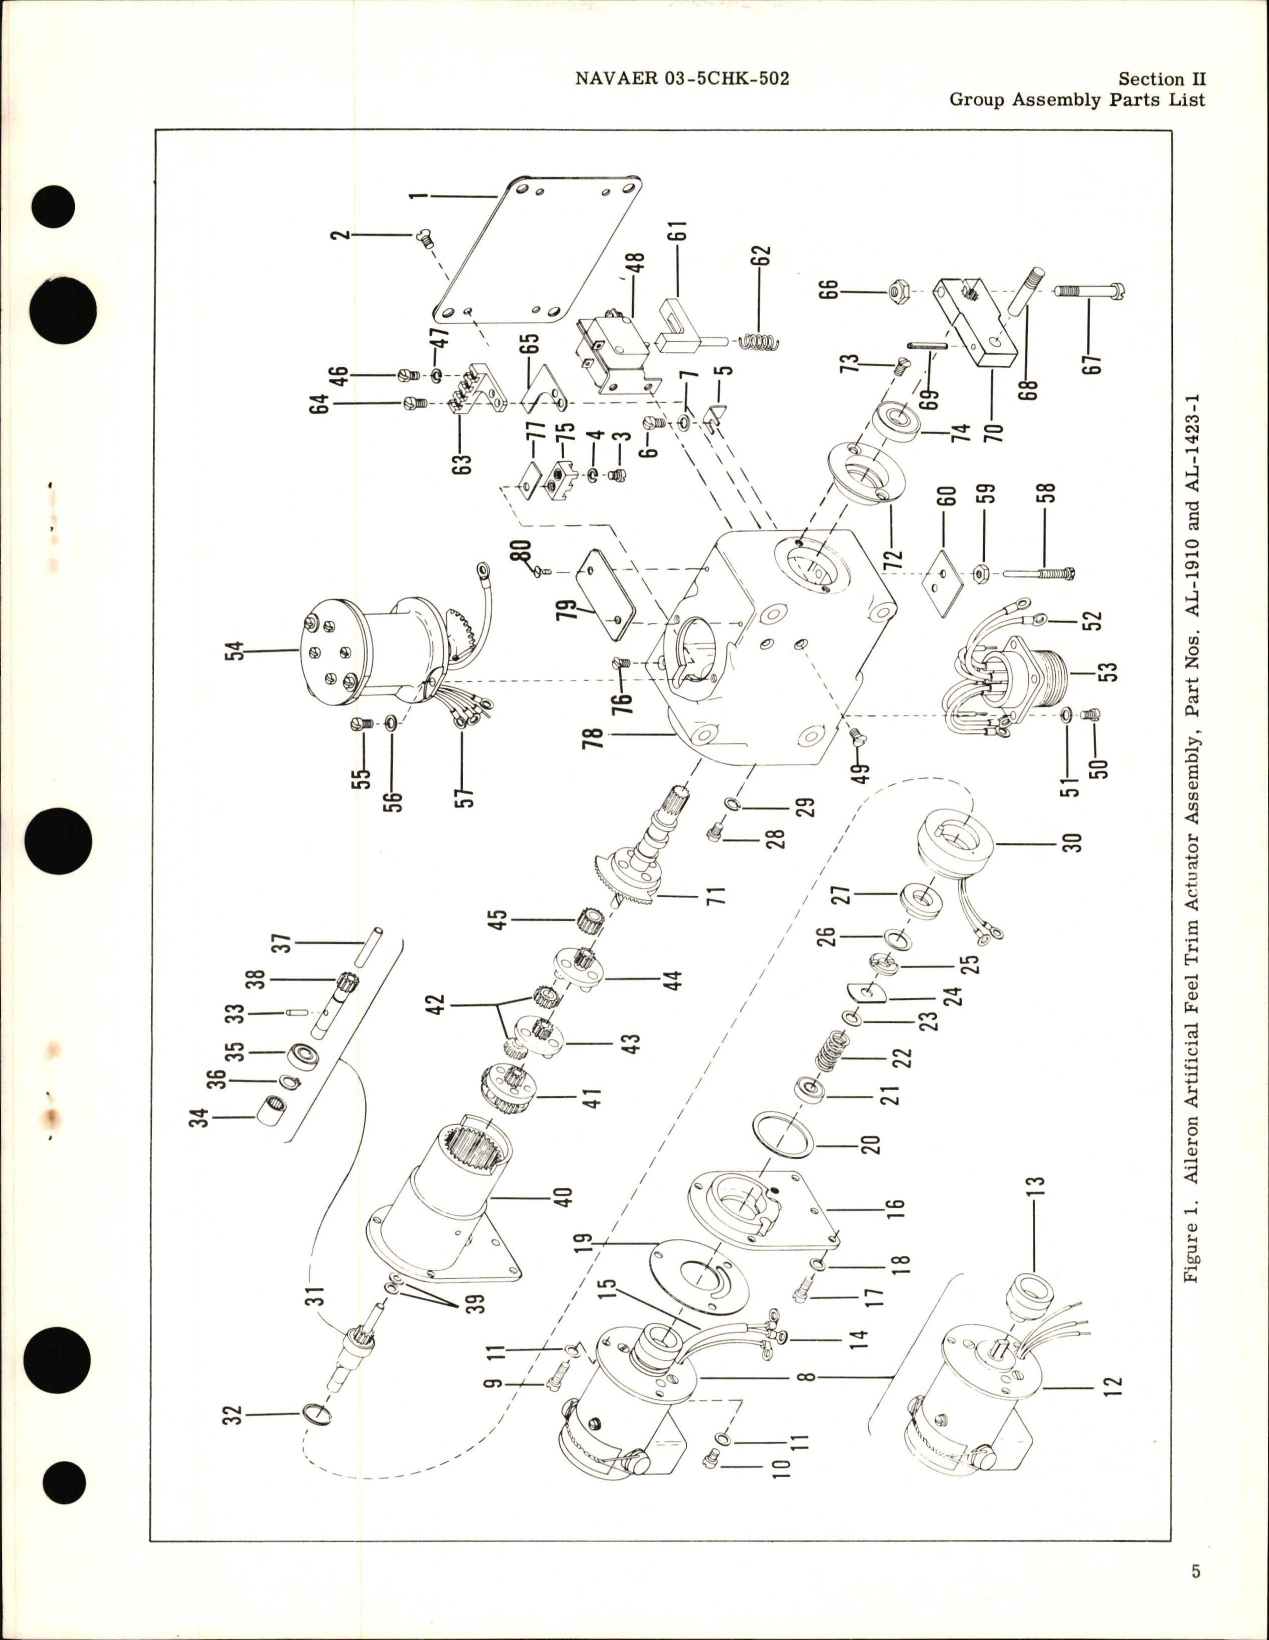 Sample page 7 from AirCorps Library document: Illustrated Parts Breakdown for Actuator Assembly, Aileron Artificial Feel Trim Part Numbers AL-1910 and AL-1423-1